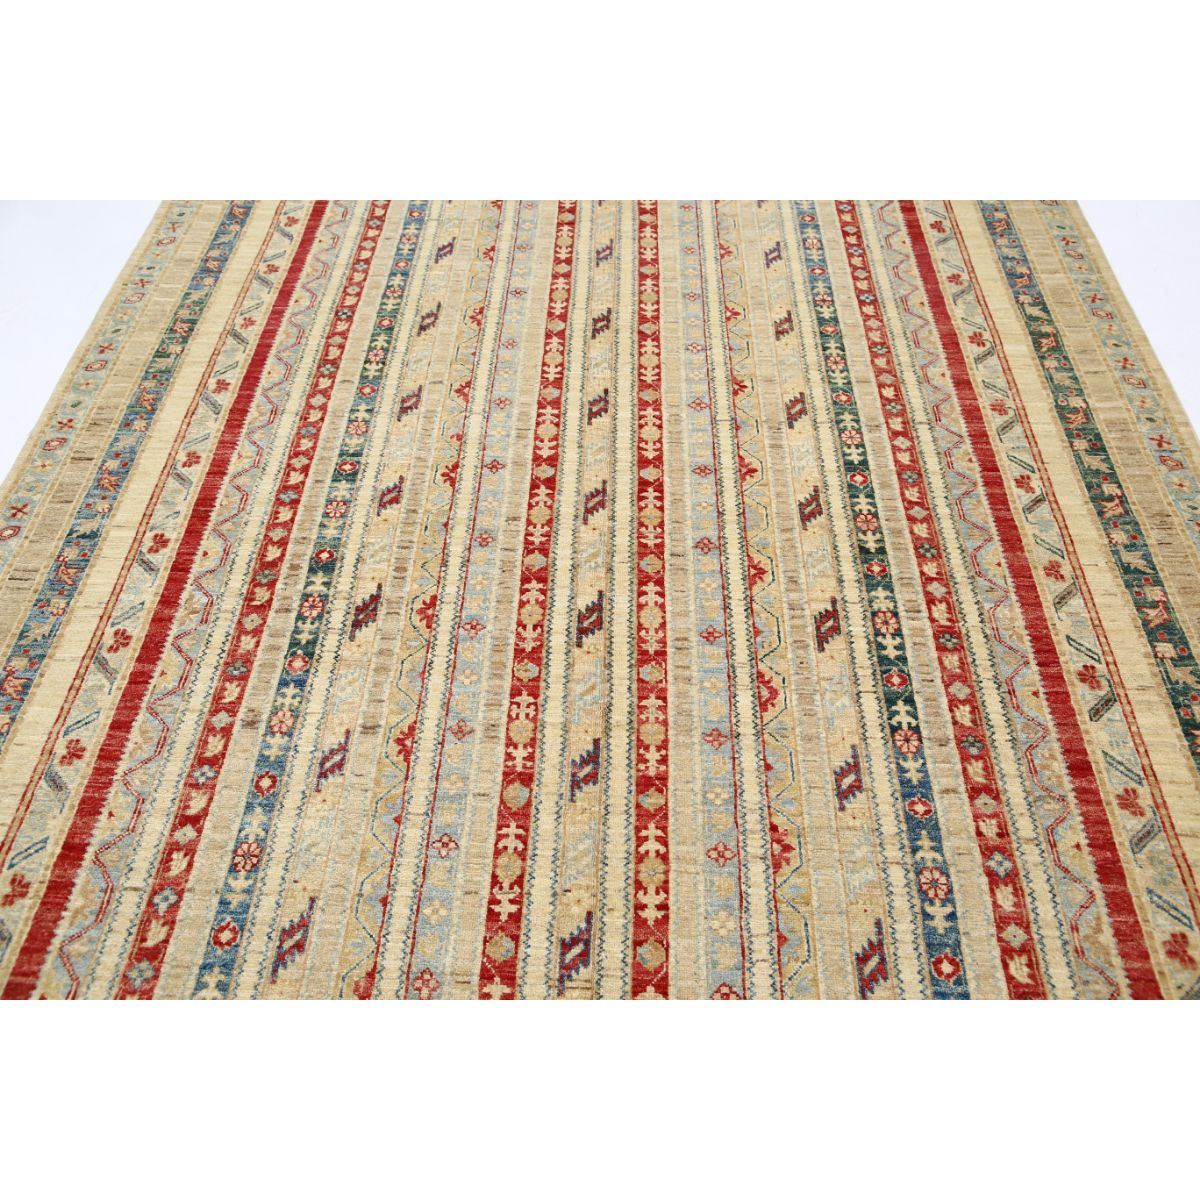 Shaal 6'9" X 9'6" Wool Hand-Knotted Rug